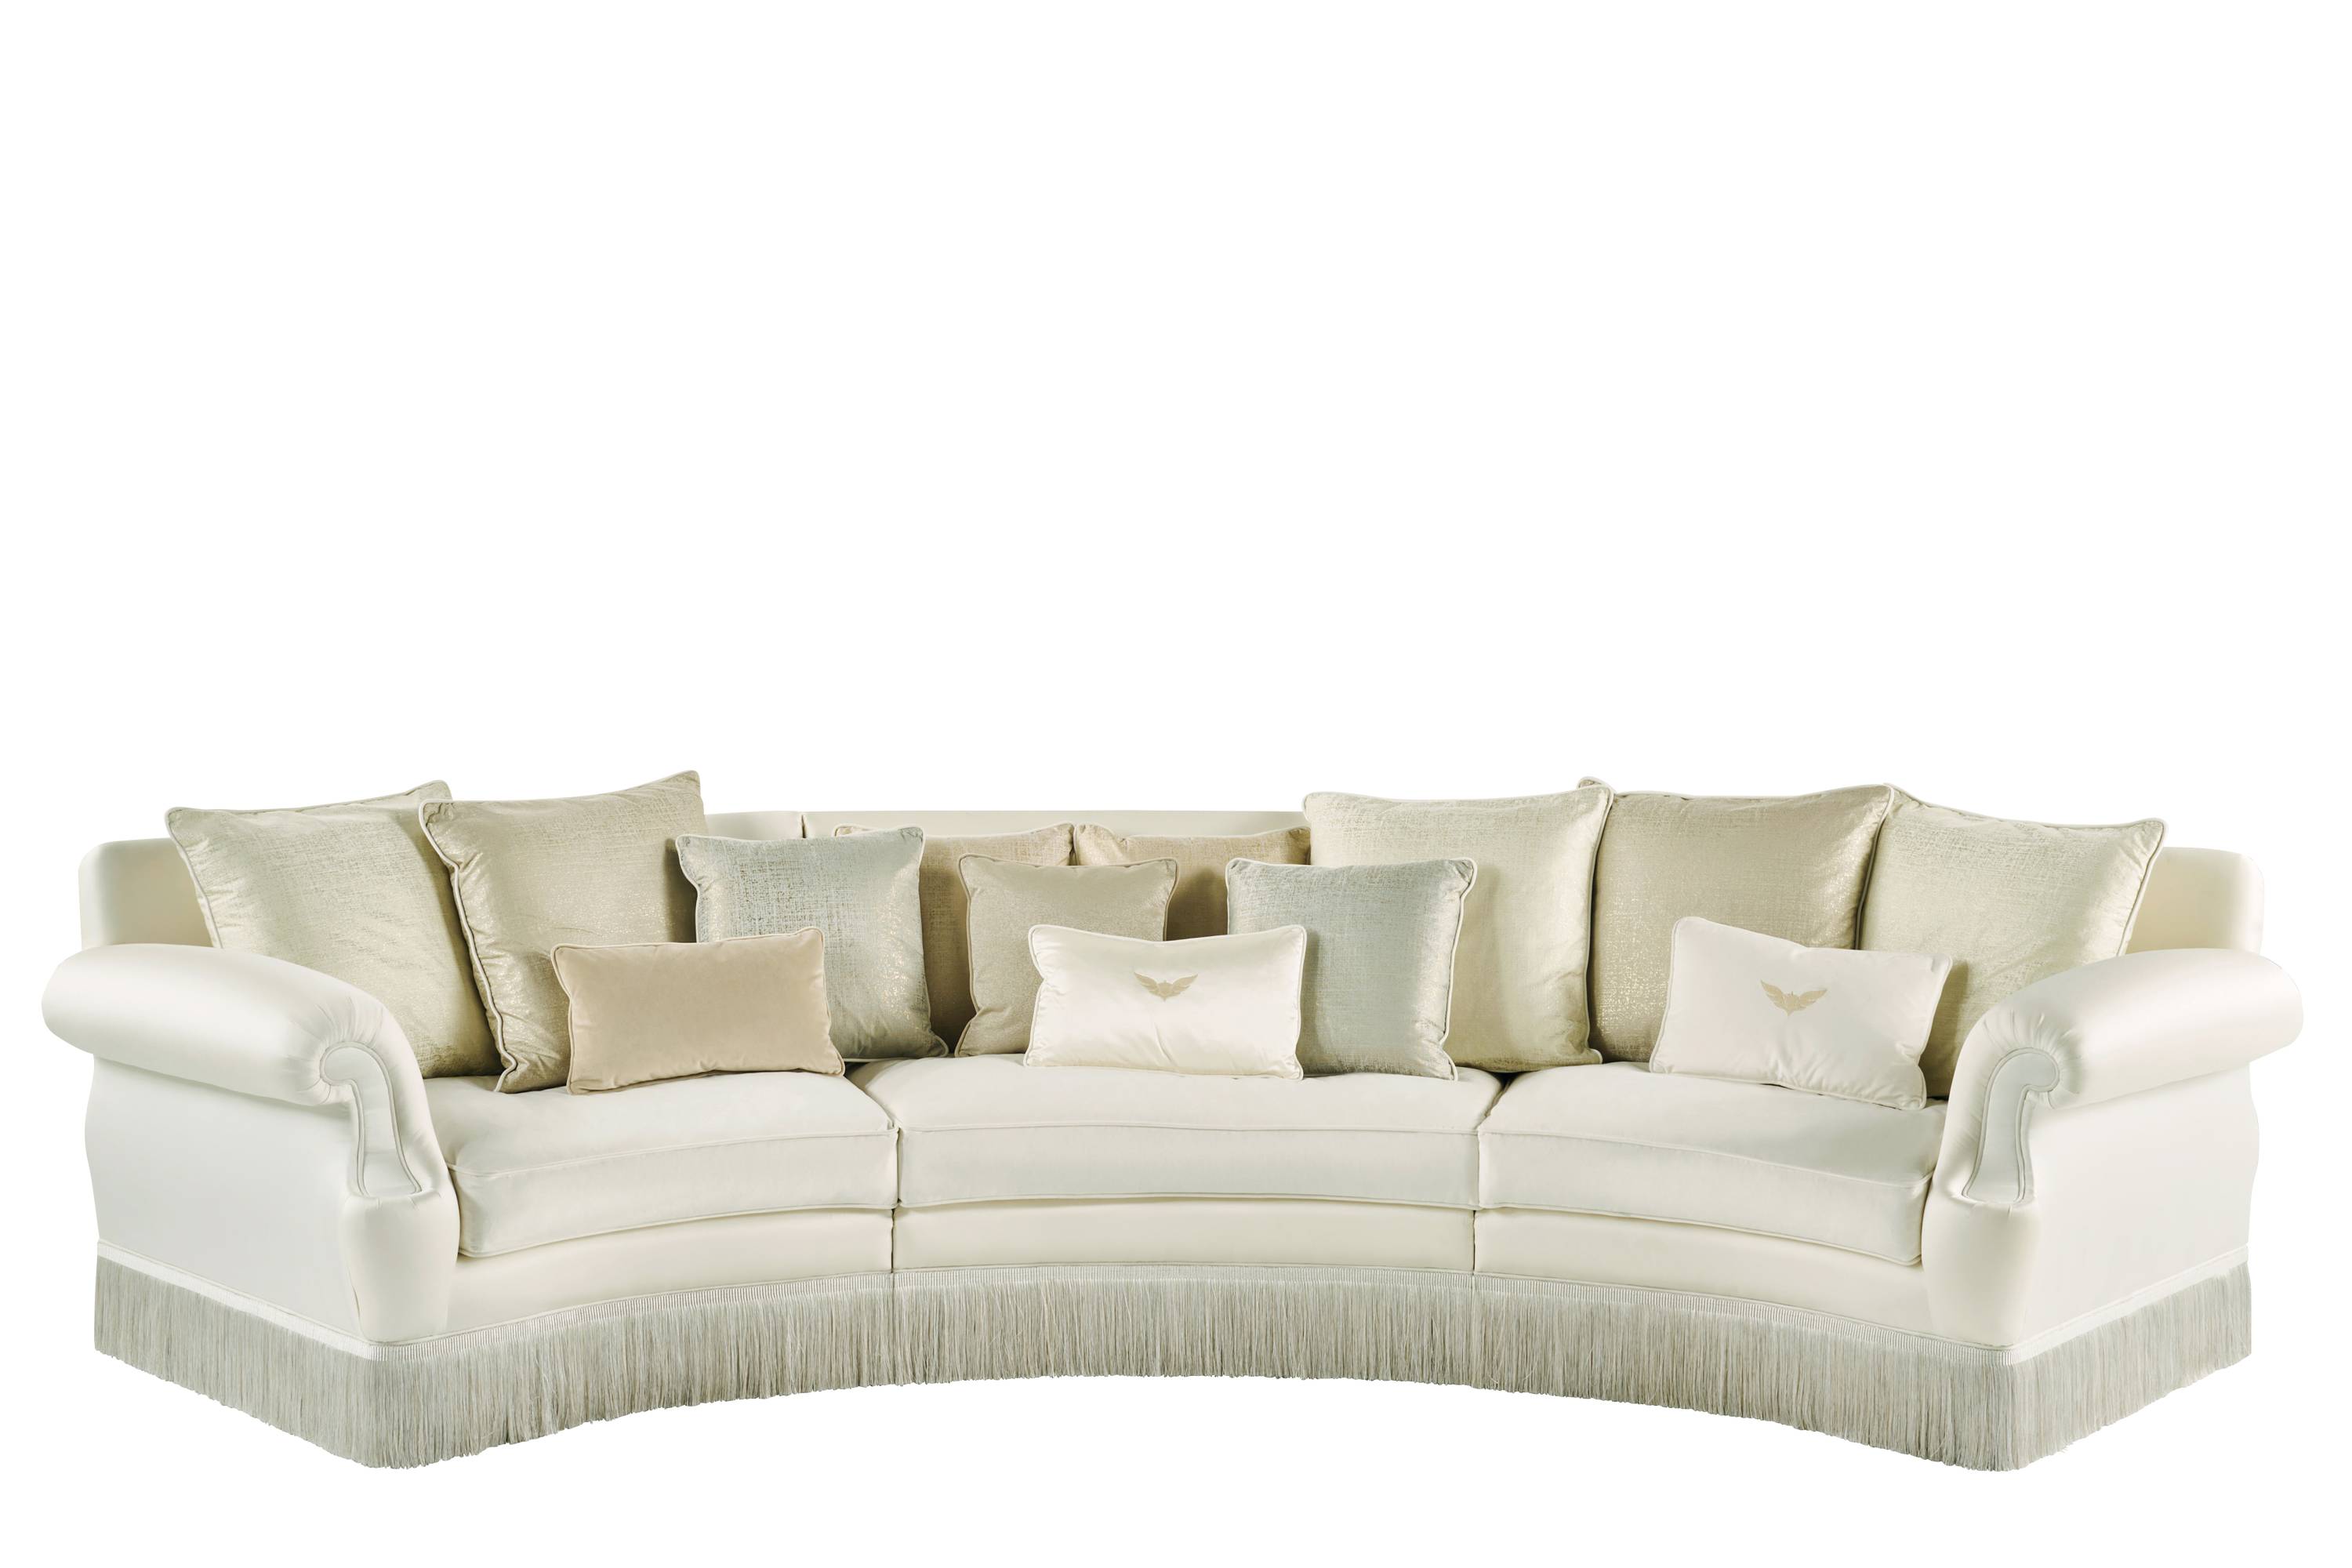 PLAZA 2-seater sofa - 3-seater sofa - armchair - sofa - Discover the elegance of luxury Héritage collection by Jumbo collection